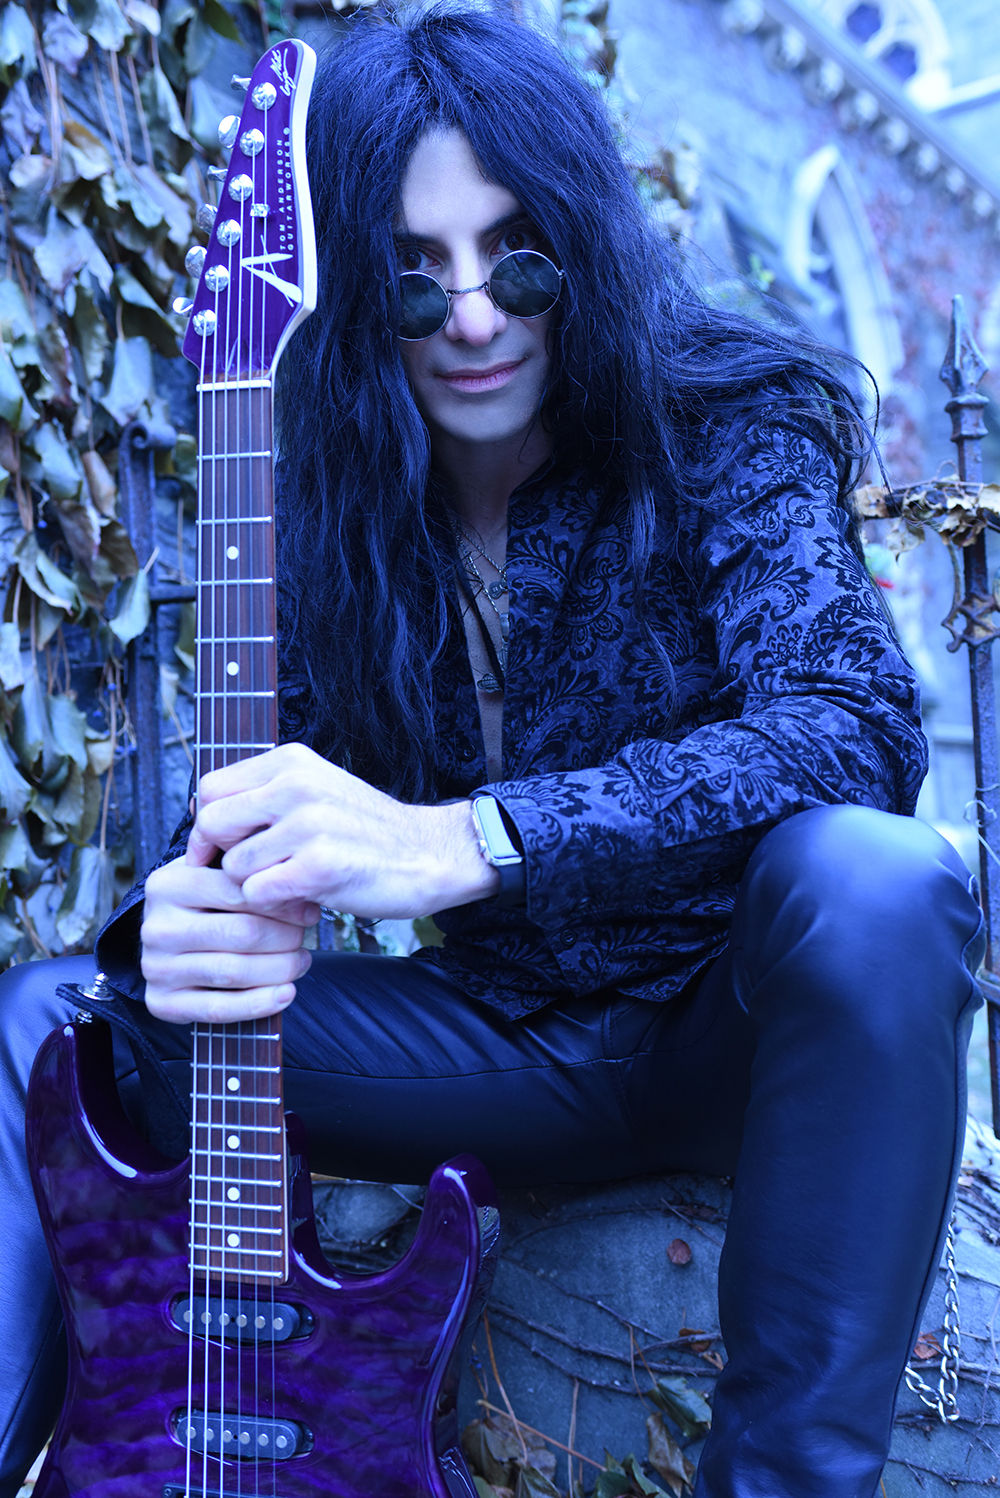 Mike Campese outside promo. "The Fire Within" Photo Session.